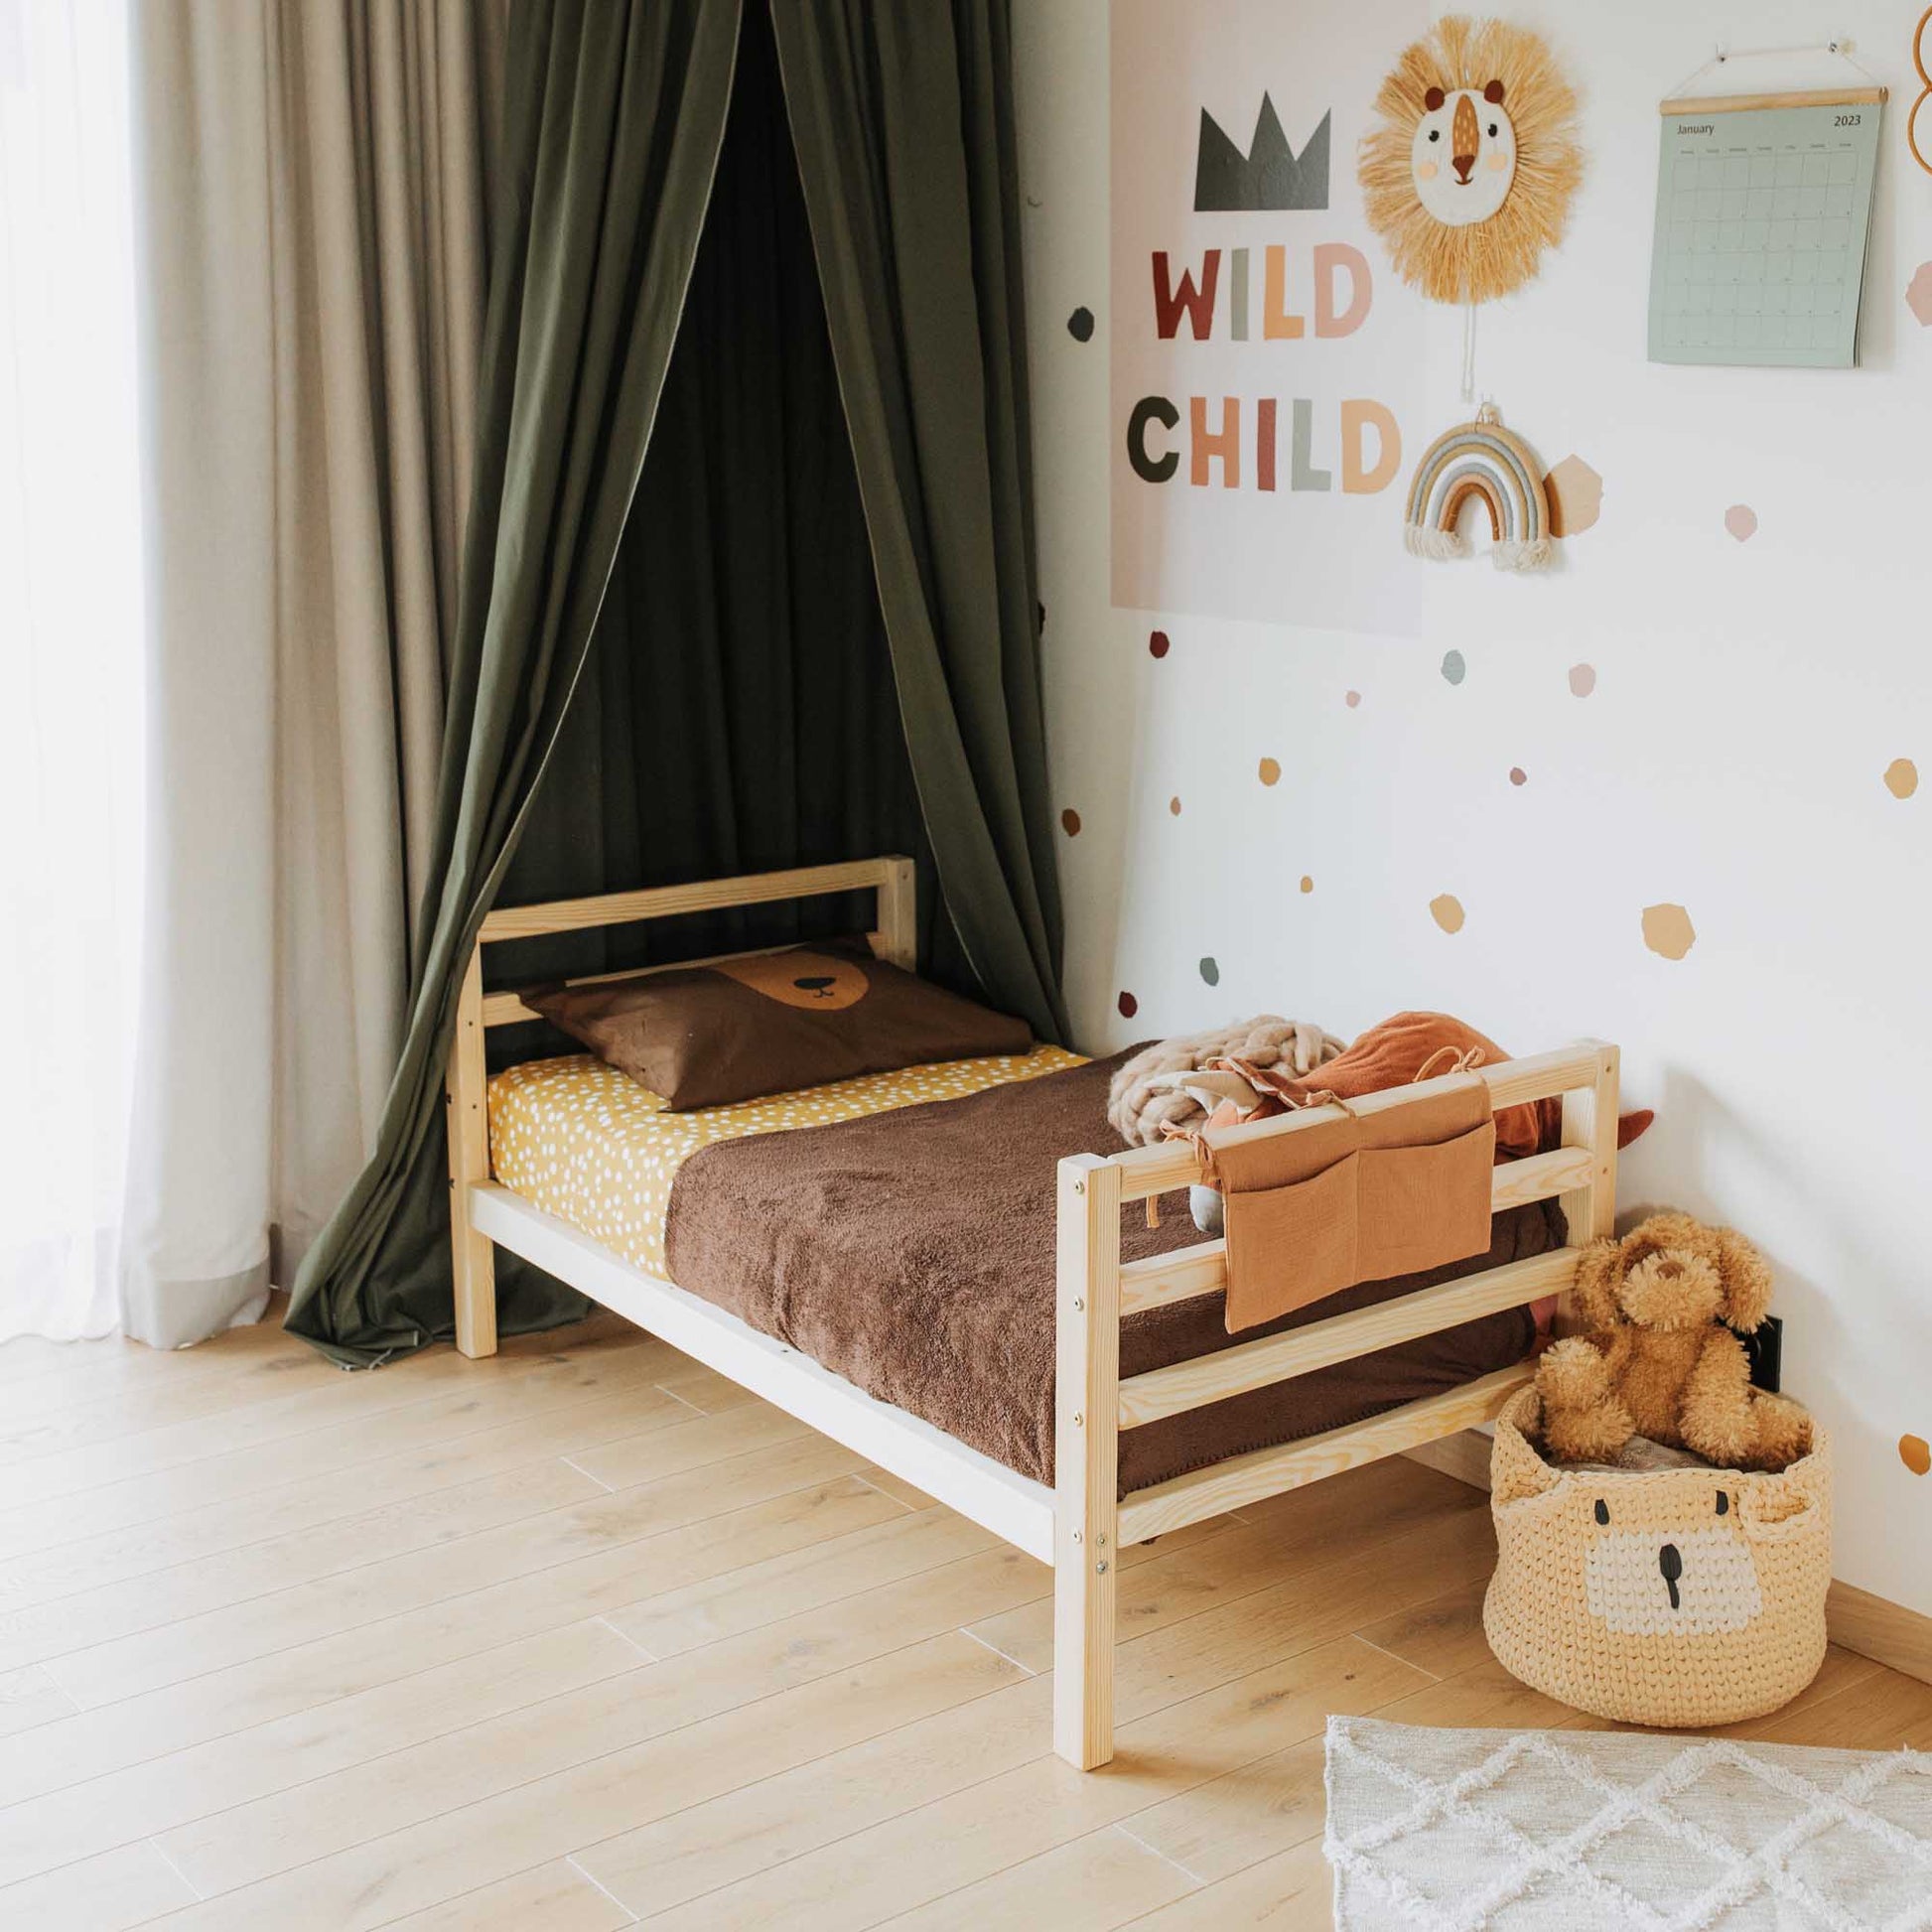 A child's room with a Sweet Home From Wood Kids' bed on legs with a horizontal rail headboard and footboard and teddy bears.